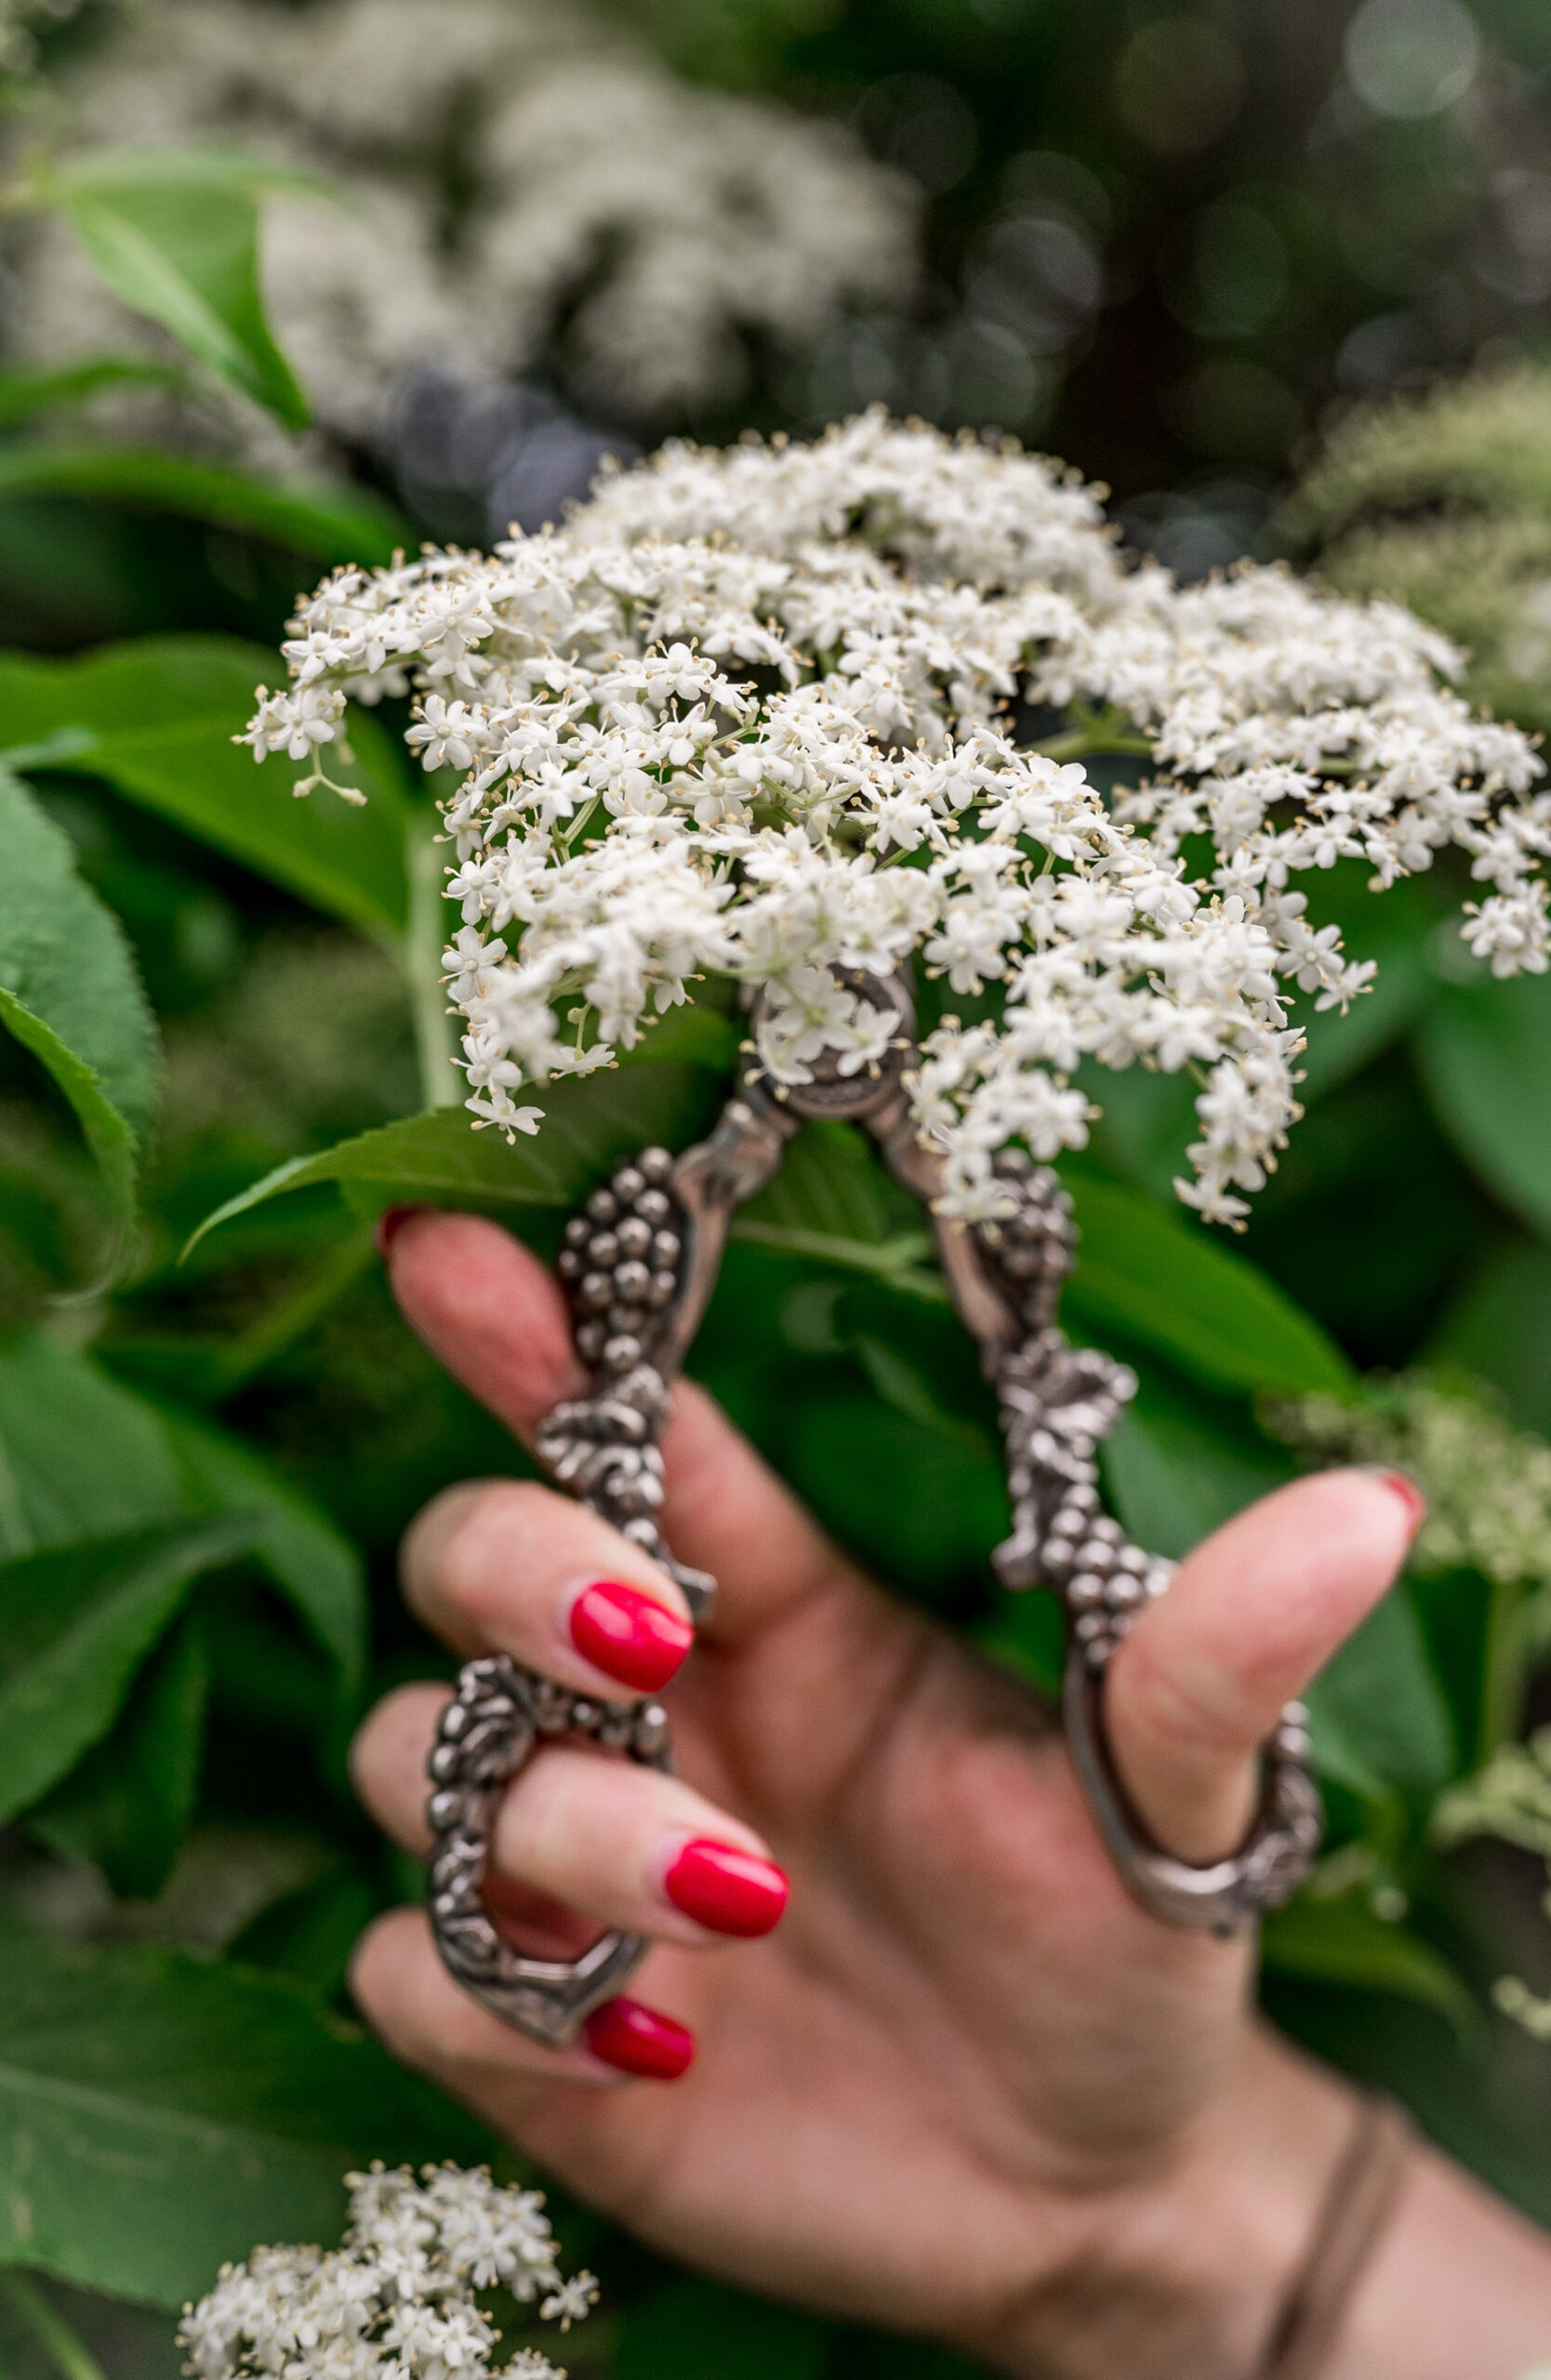 woman's hand withh red nails cutting elderflower with vintage scissors